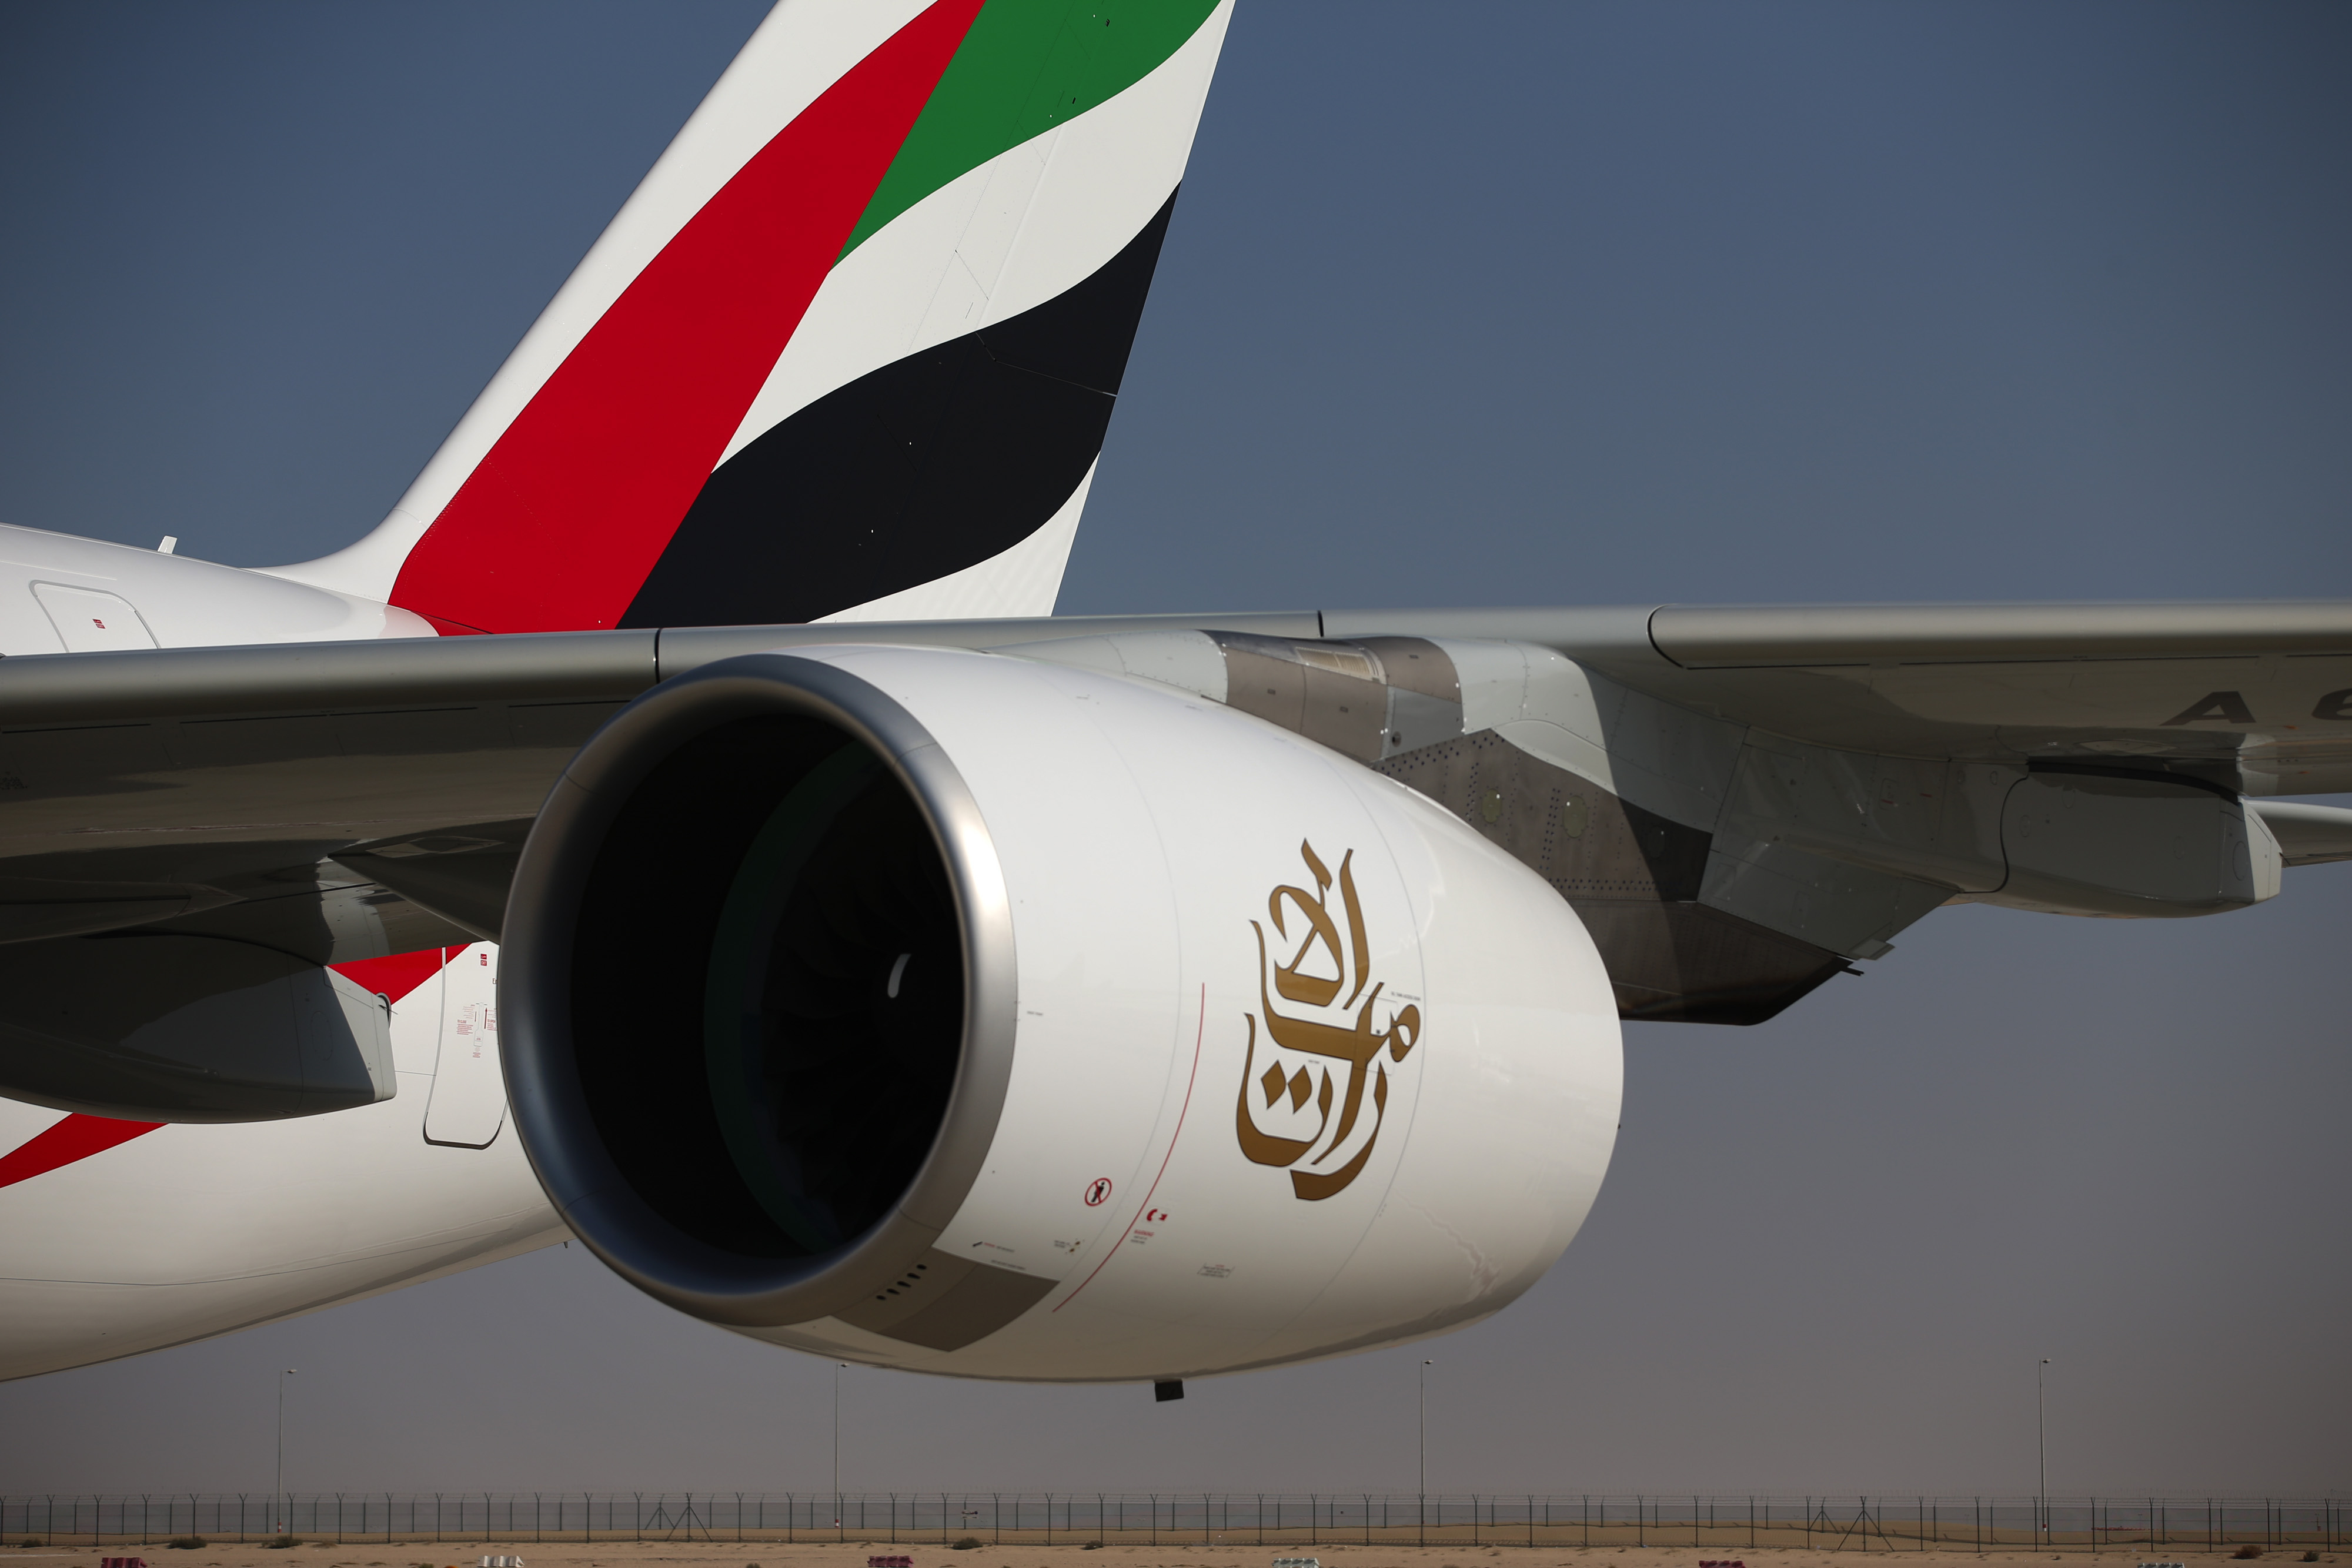 The engine of an Airbus SAS A380-800 aircraft hangs from the wing of an Emirates Airline aircraft on the opening day of the 14th Dubai Air Show in Dubai on Nov. 8, 2015 (Bloomberg/Getty Images)